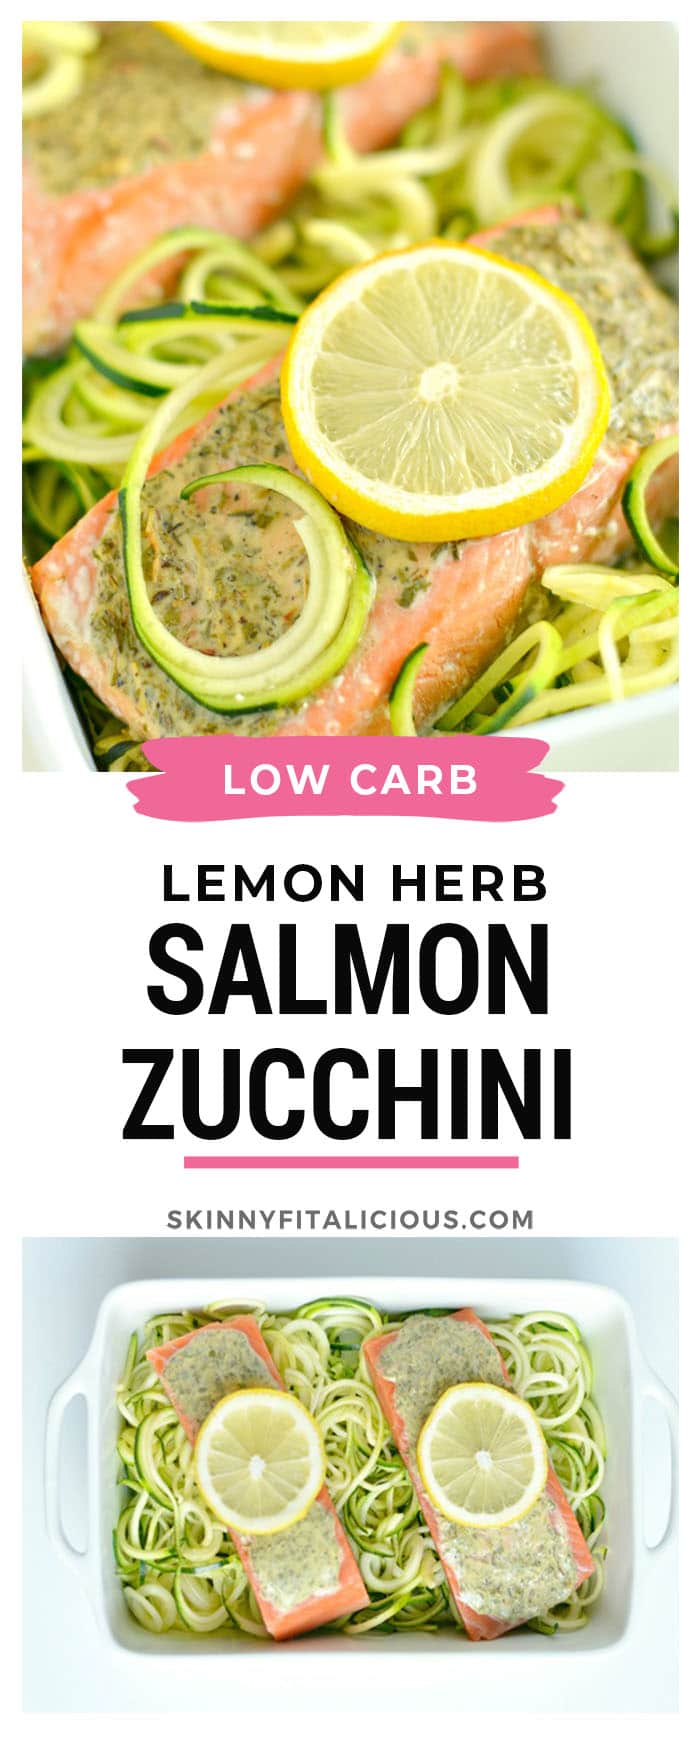 Lemon Herb Salmon Zucchini is a quick one pan meal packed with protein and tons of flavor. A 30-minute weeknight dinner that's low carb, low calorie, gluten free, dairy free and Paleo!